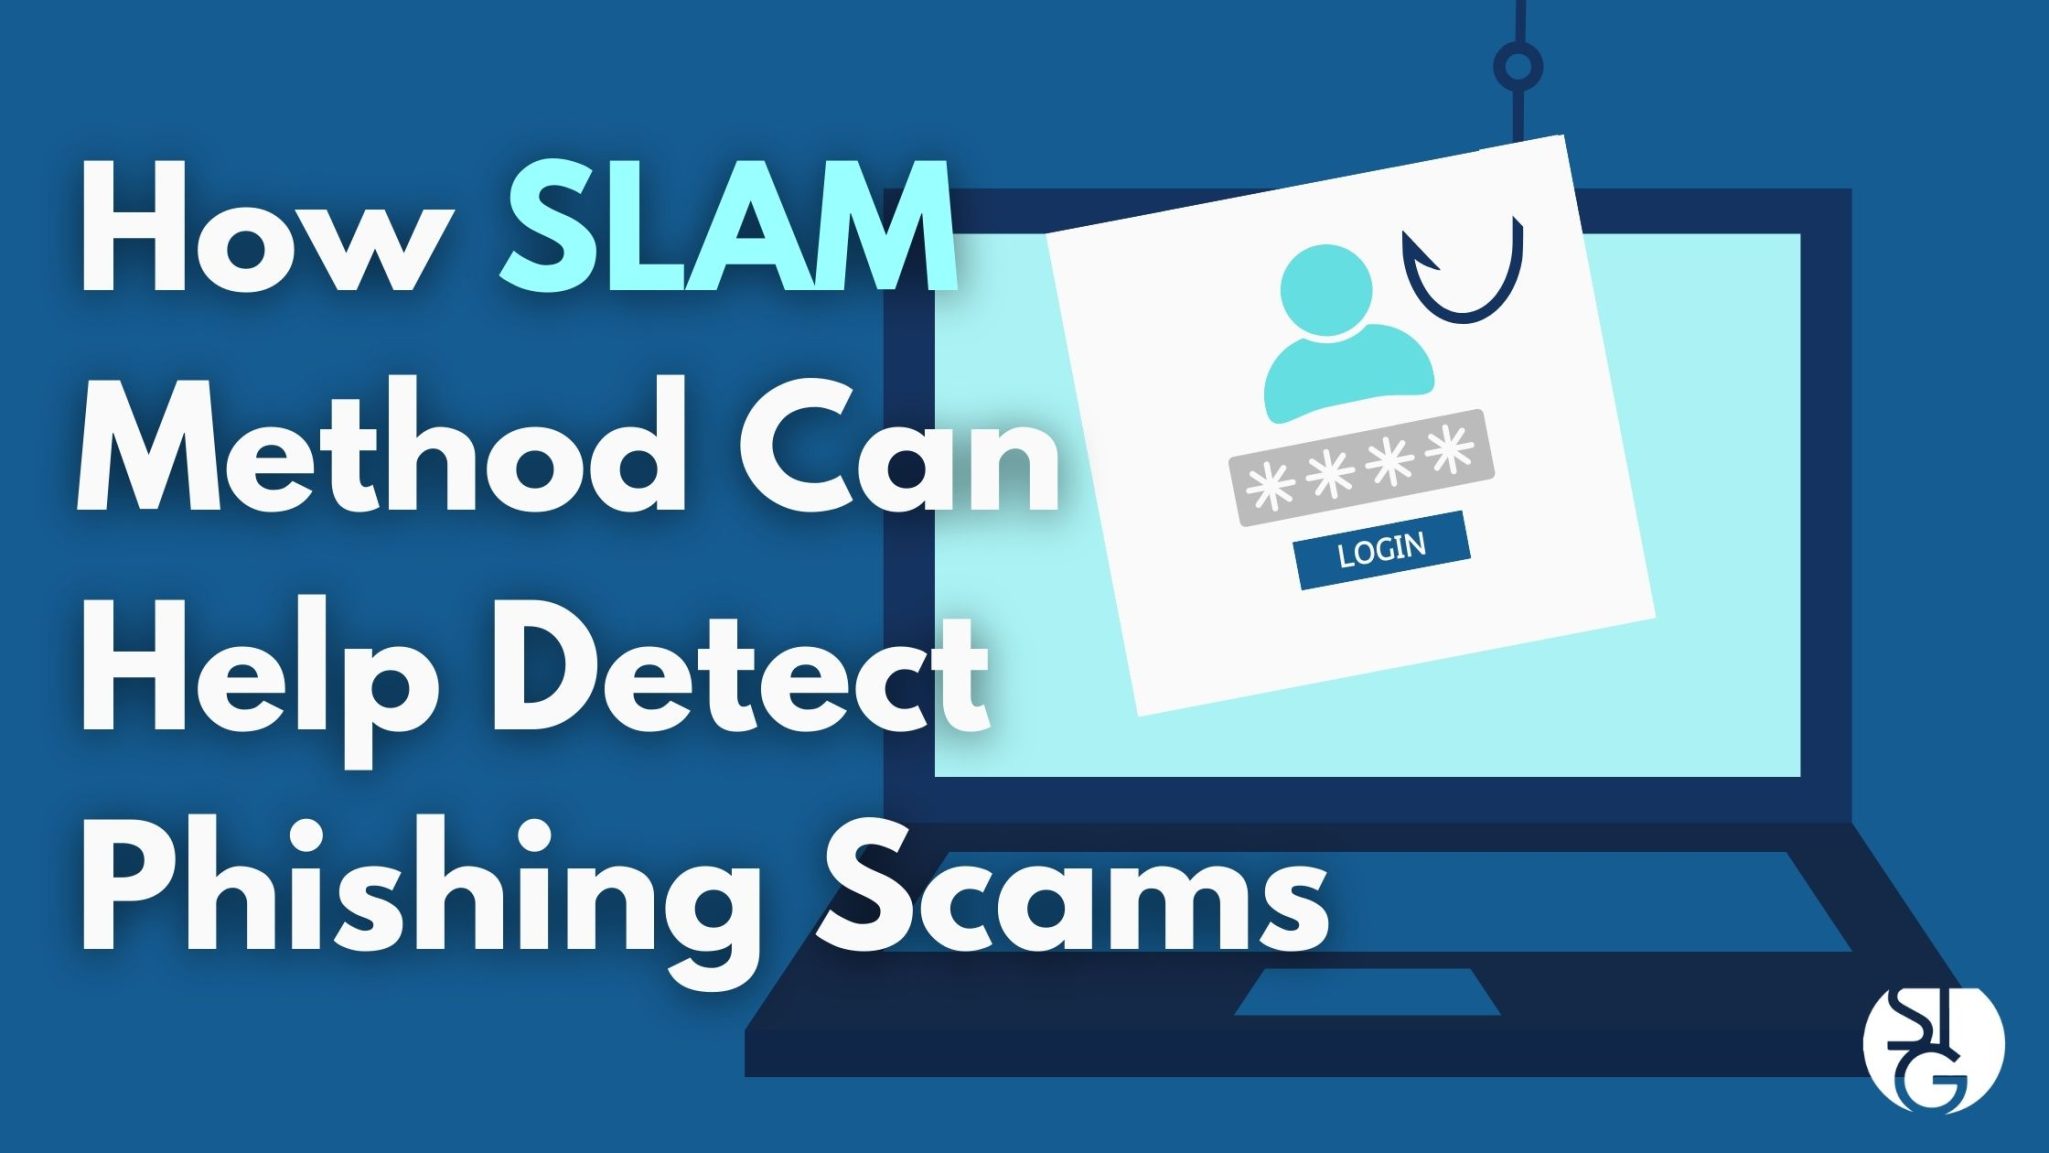 How the SLAM Approach Can Help Detect Phishing